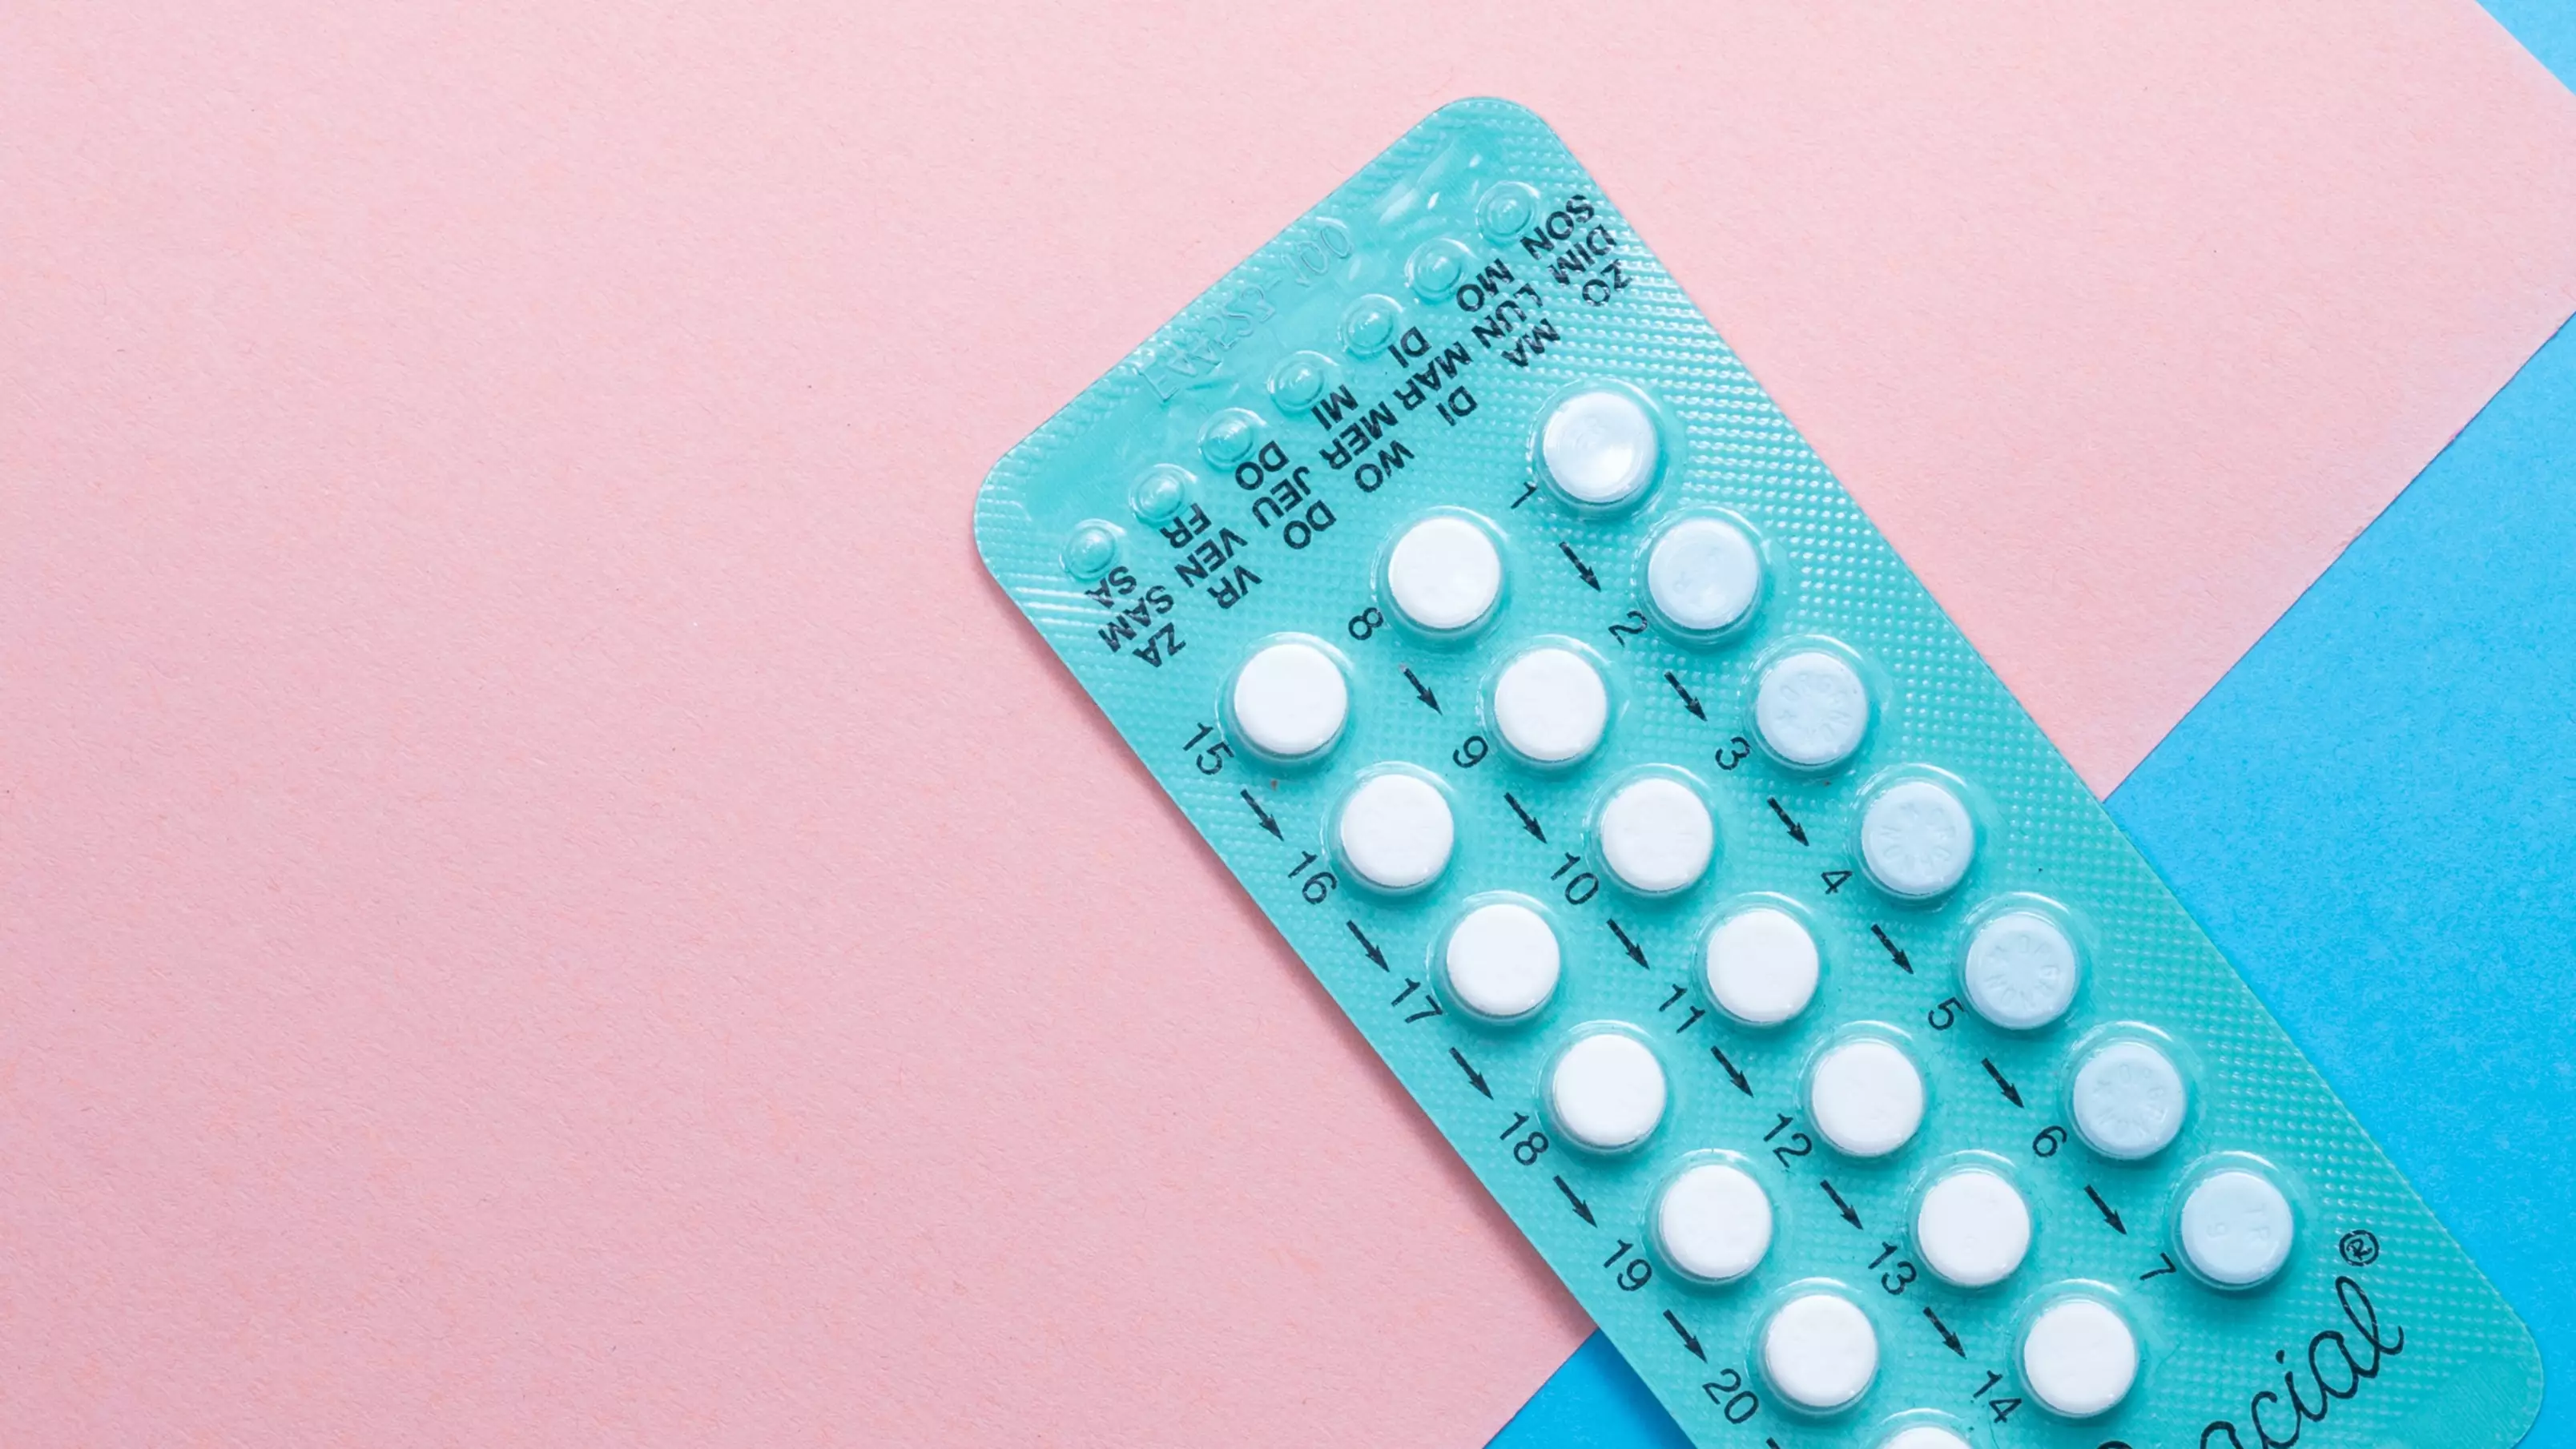 Acne, Hair Loss And Mood Swings: Women Are Sharing The Realities Of Coming Off The Pill